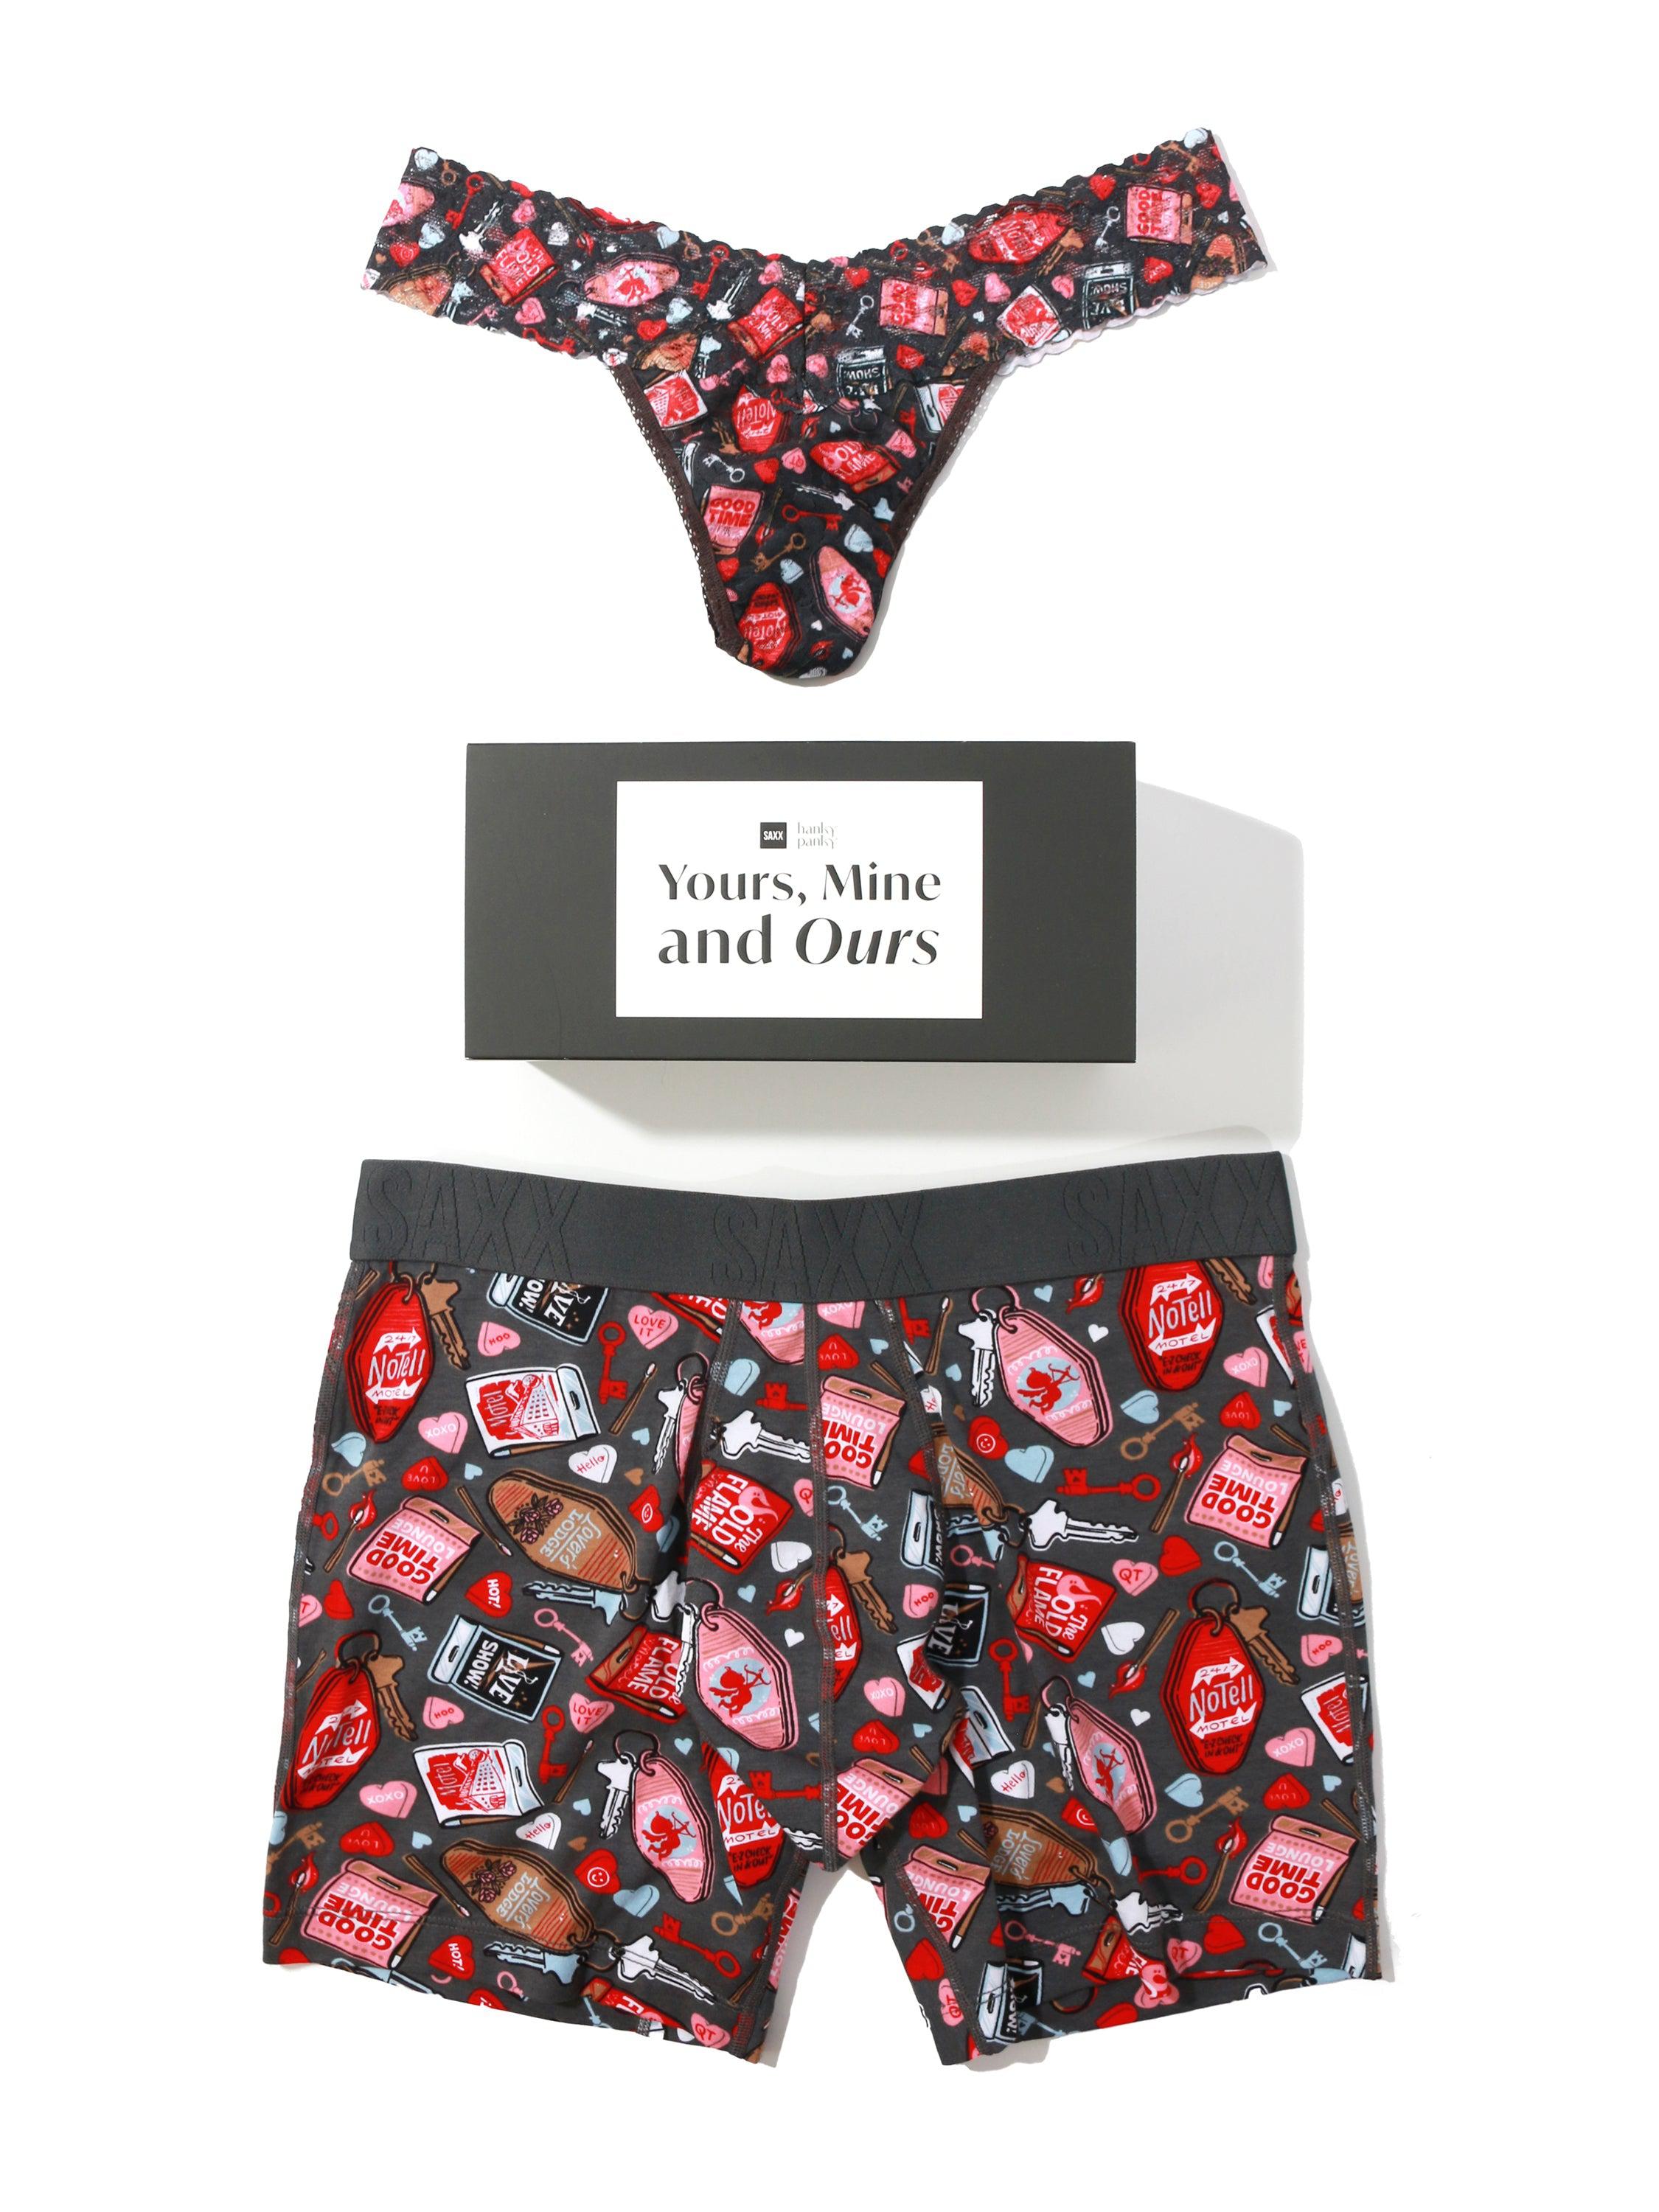 Your Lucky Day Sexy Couple Matching Underwear, Valentines Day Gift